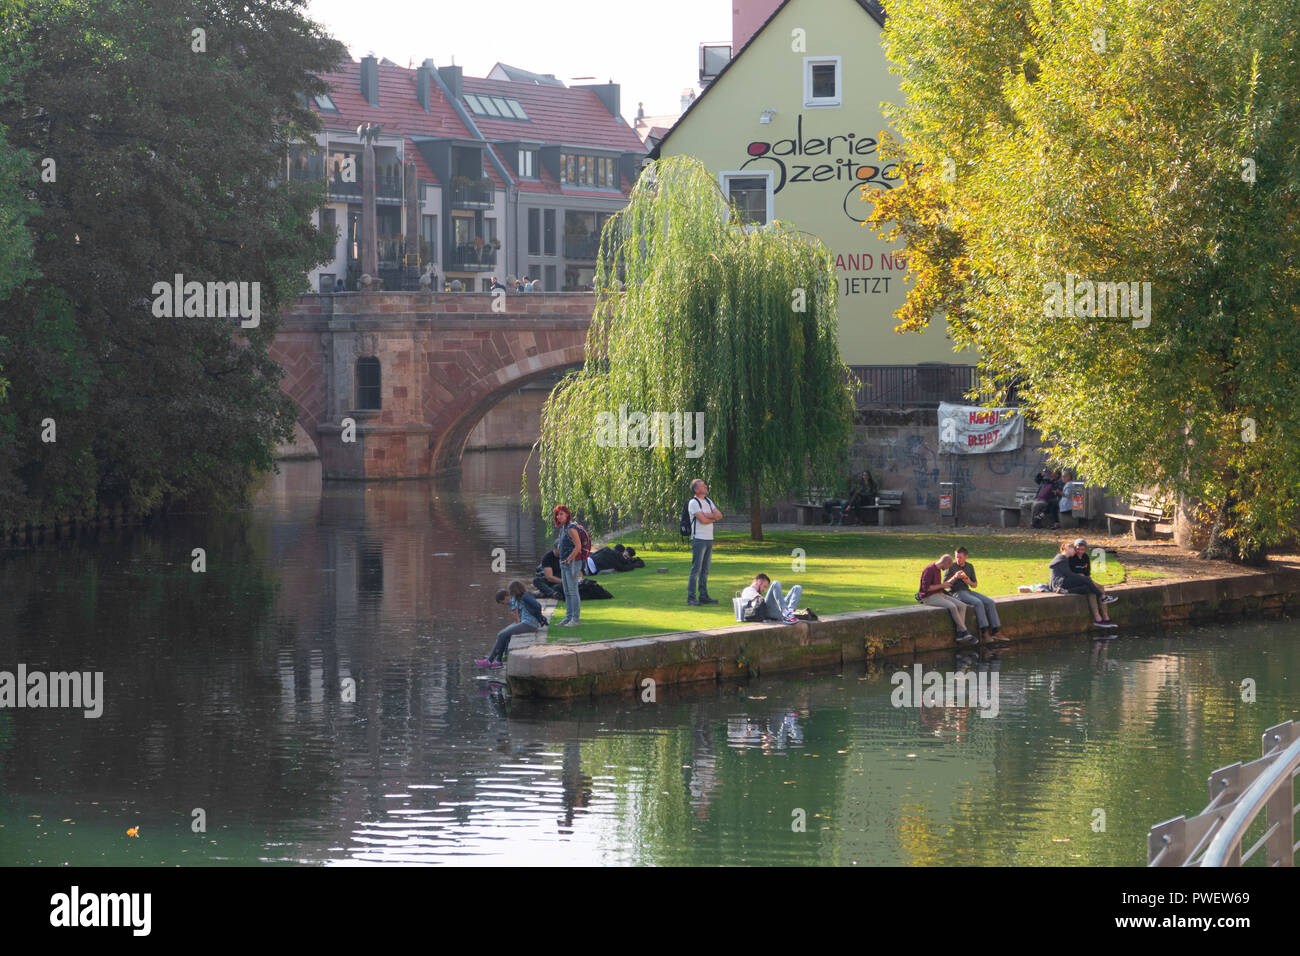 People enjoy a sunny afternoon at the Pegnitz river in Nuremberg, Germany. Stock Photo